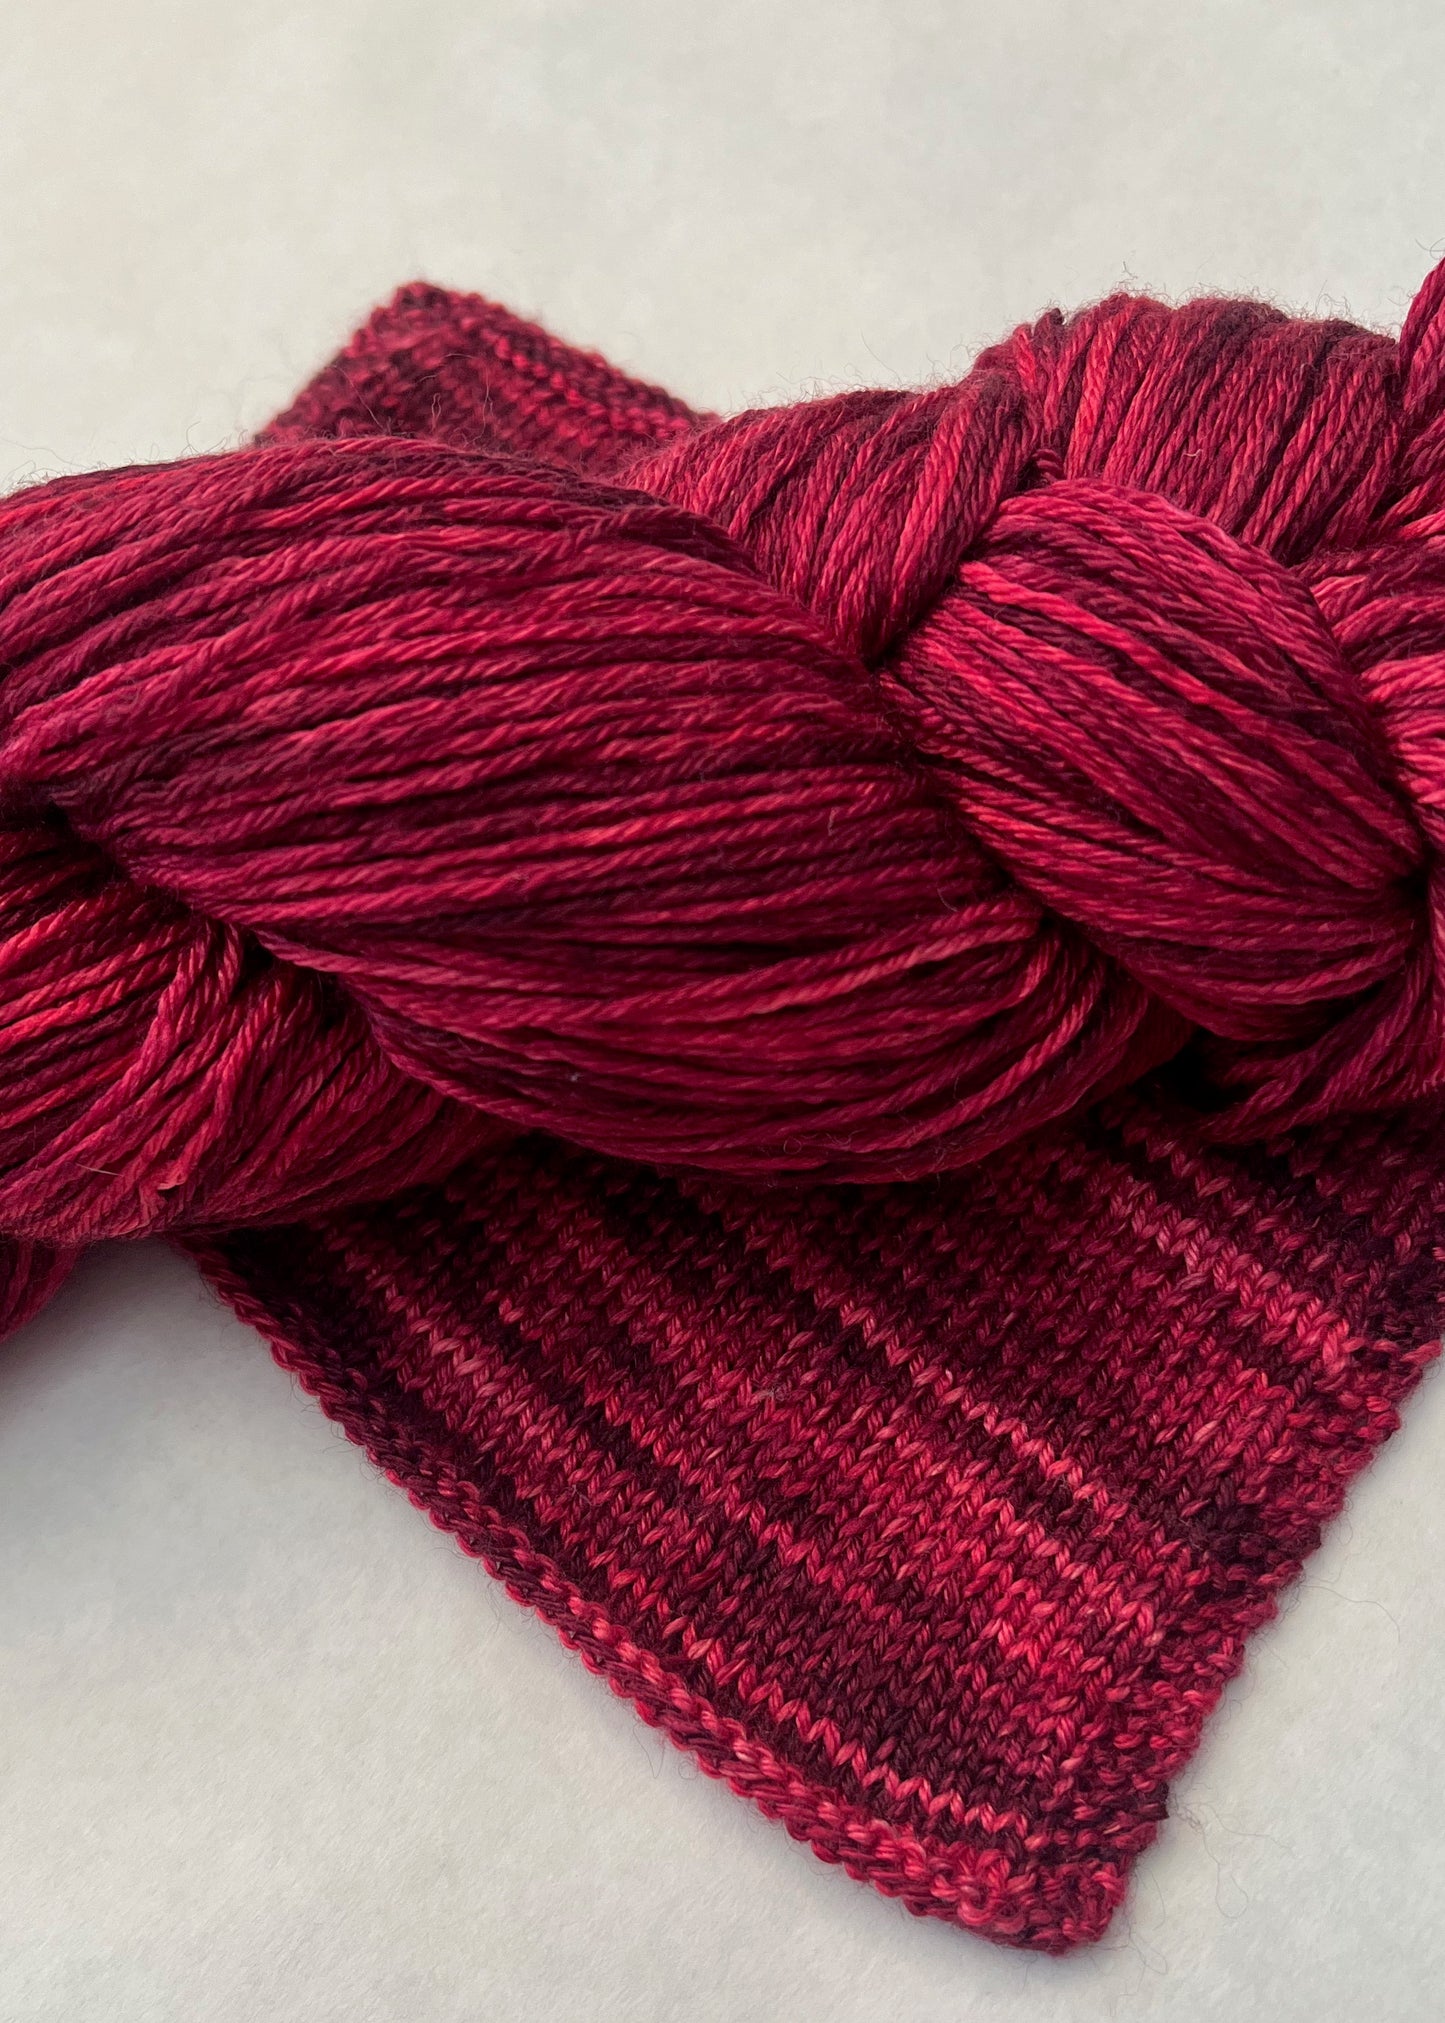 Dyed to order: Mulled Wine